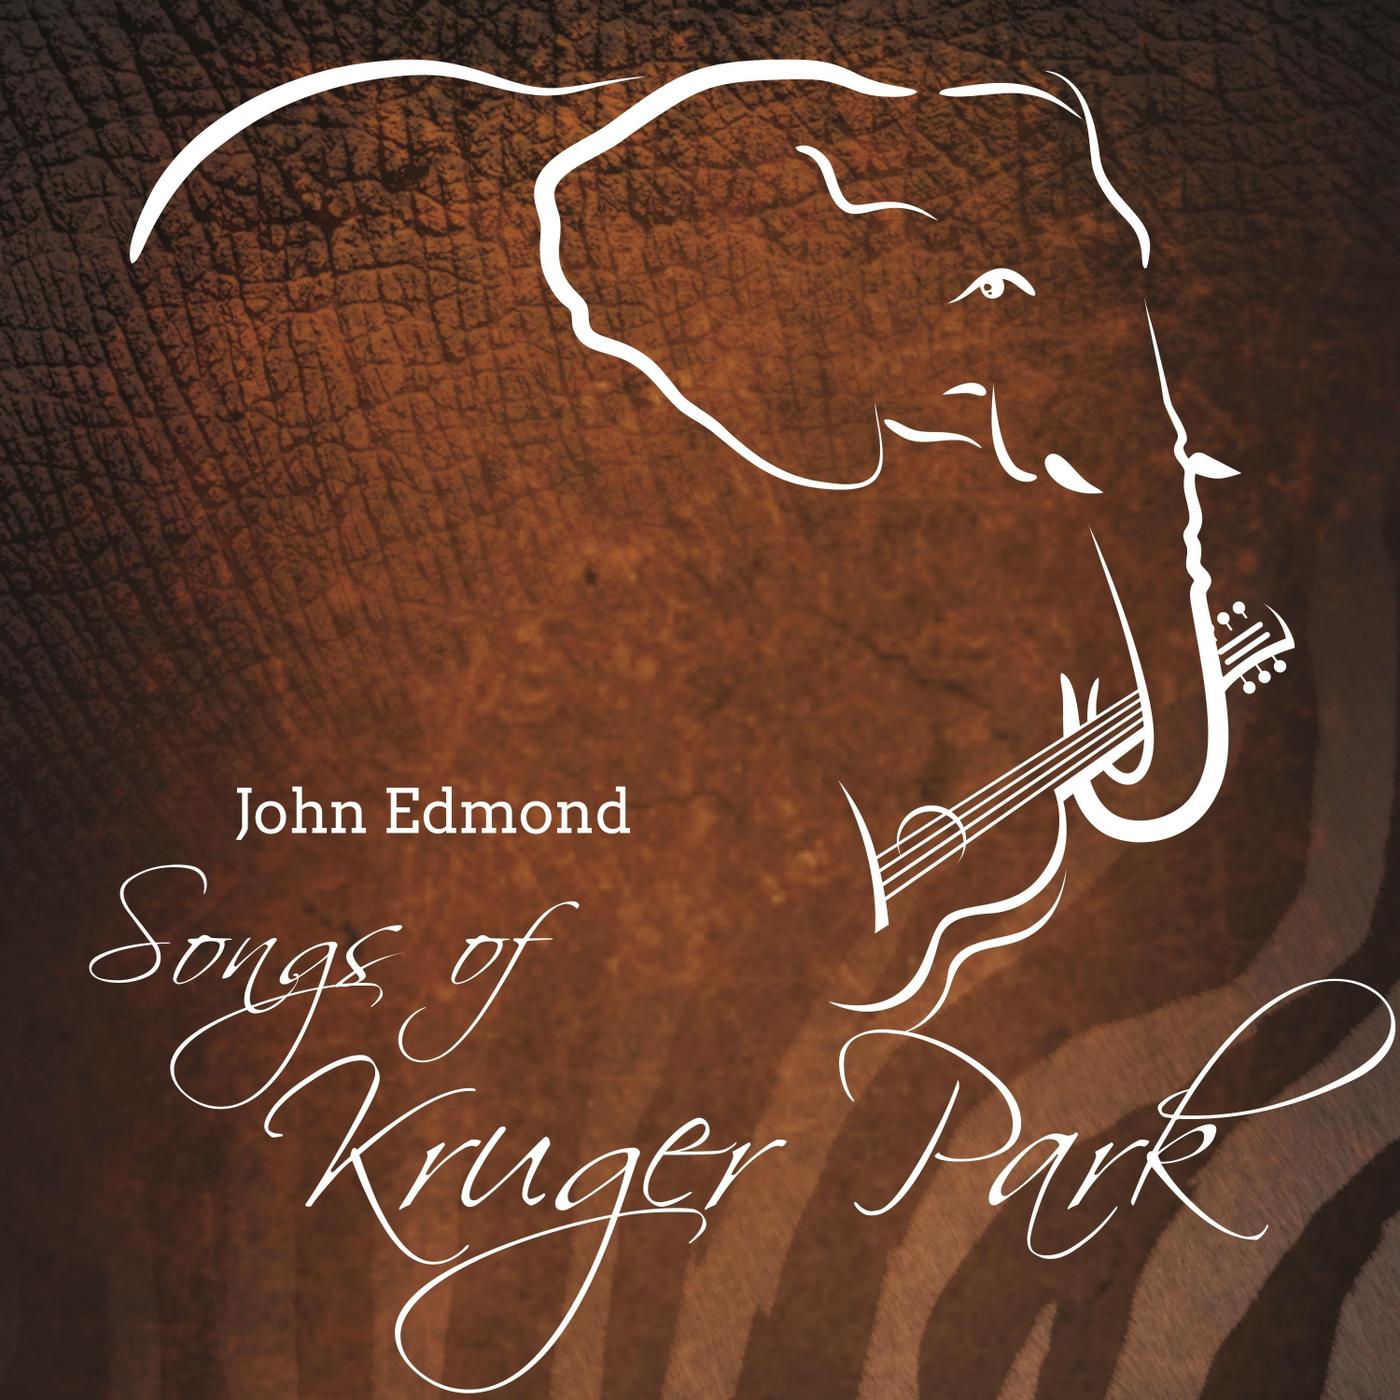 Songs of Kruger Park